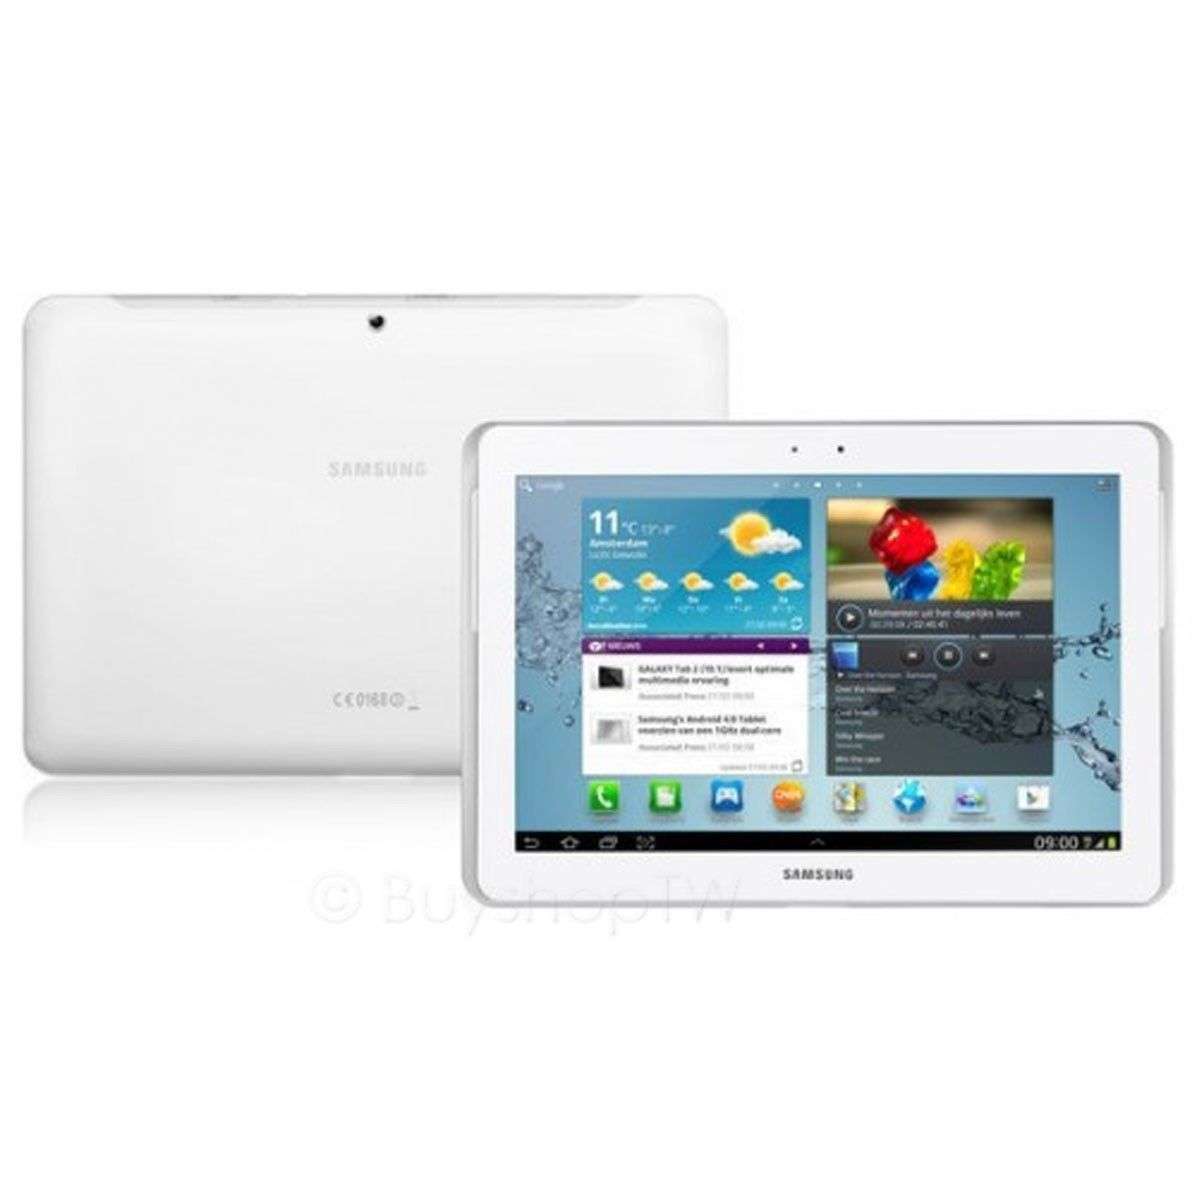 Samsung Galaxy Tab 2: A Closer Look at the Release Date and Exciting Features